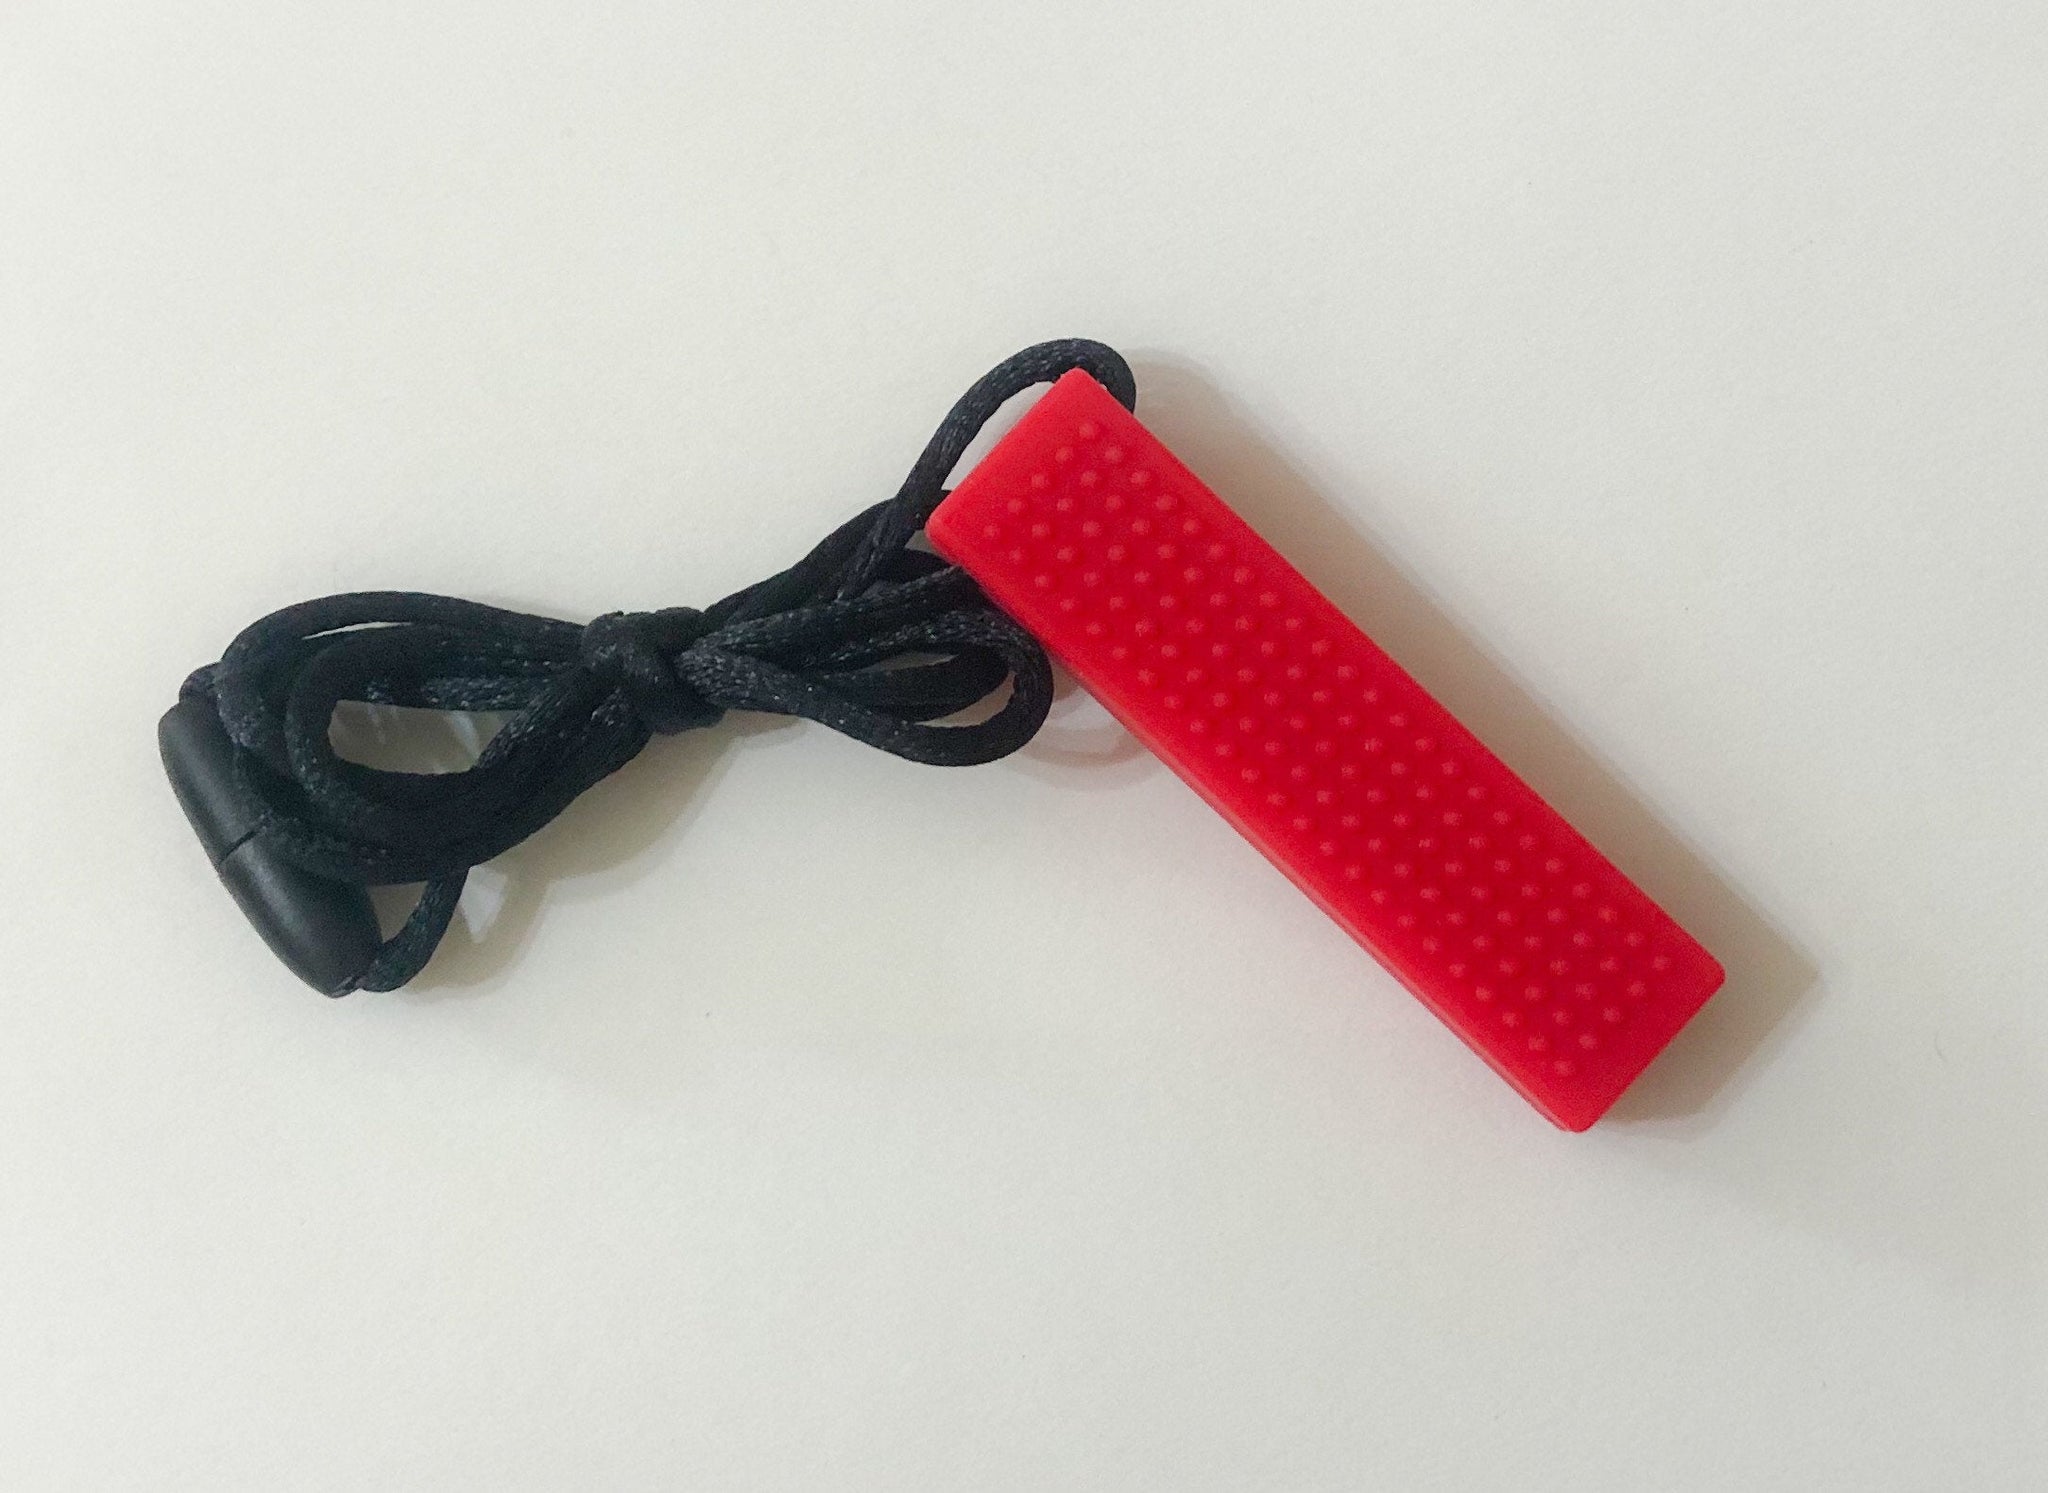 Silicone Block Pendant Teether Red - Autism - Chew Jewelry - Silicone Teether - Spectrum - ADHD - Sensory - Fidget Toy - Silicone Beads